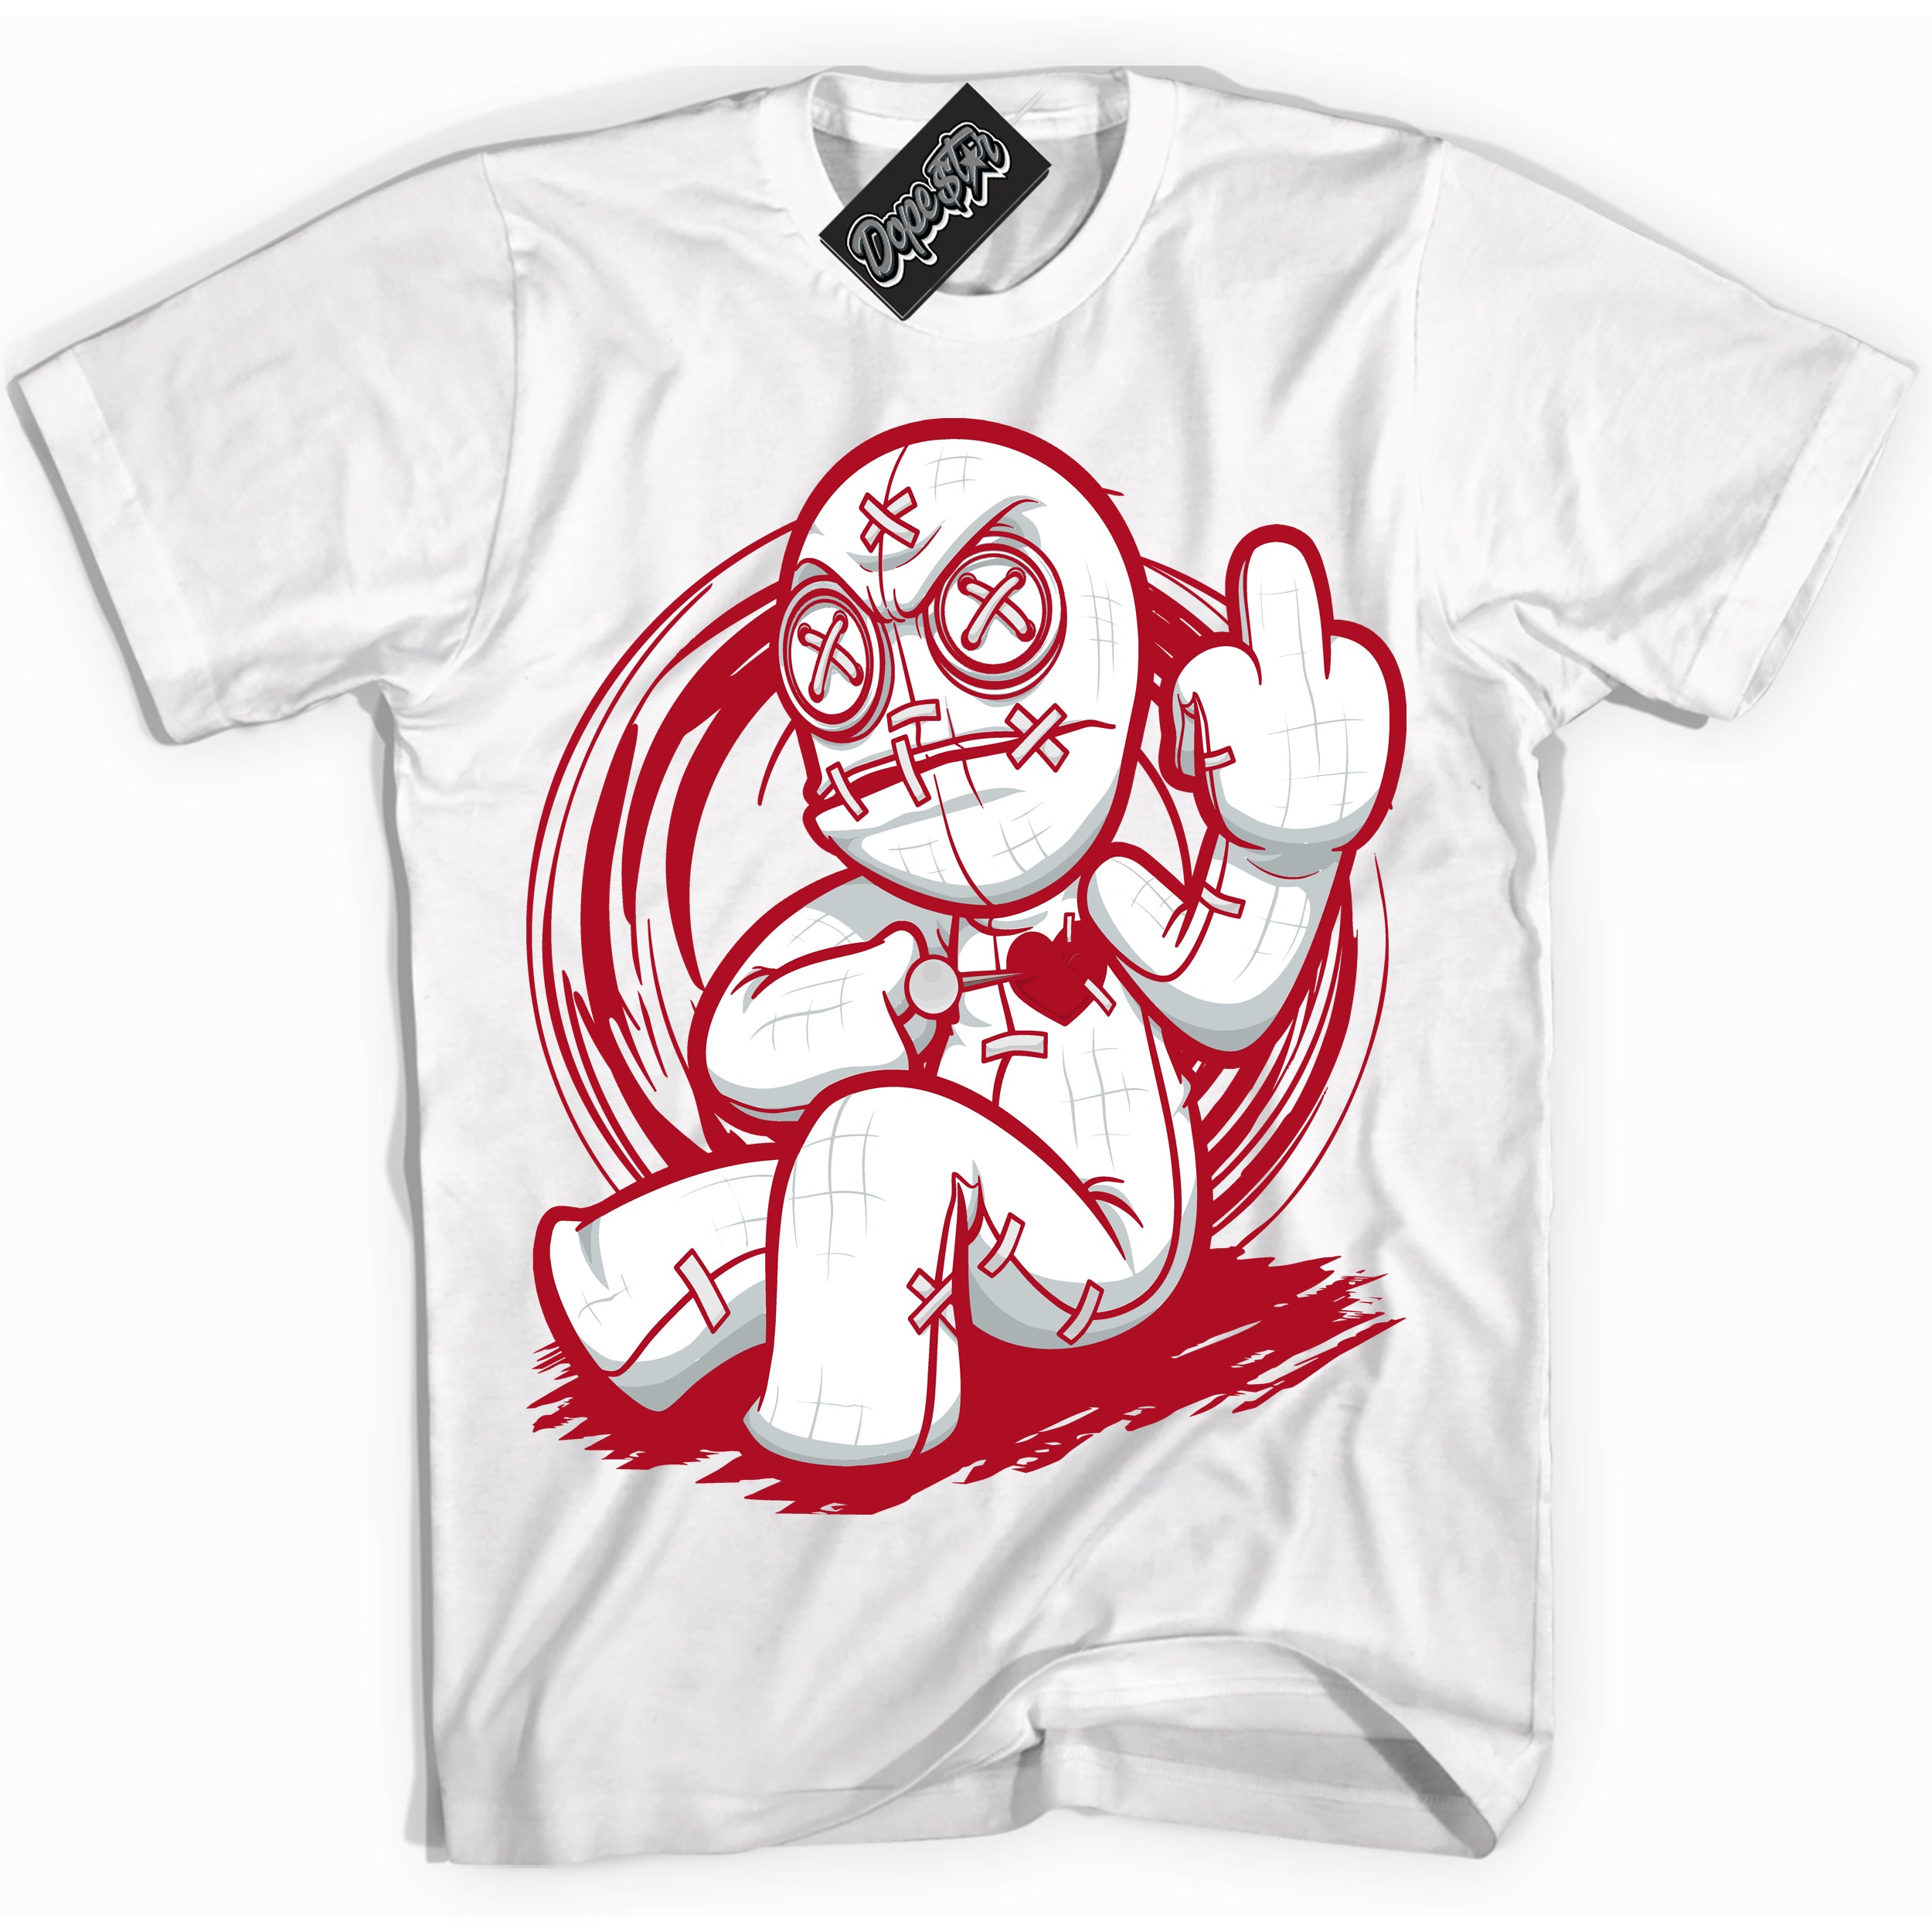 Cool White Shirt with “ VooDoo Doll” design that perfectly matches Reverse Ultraman Sneakers.